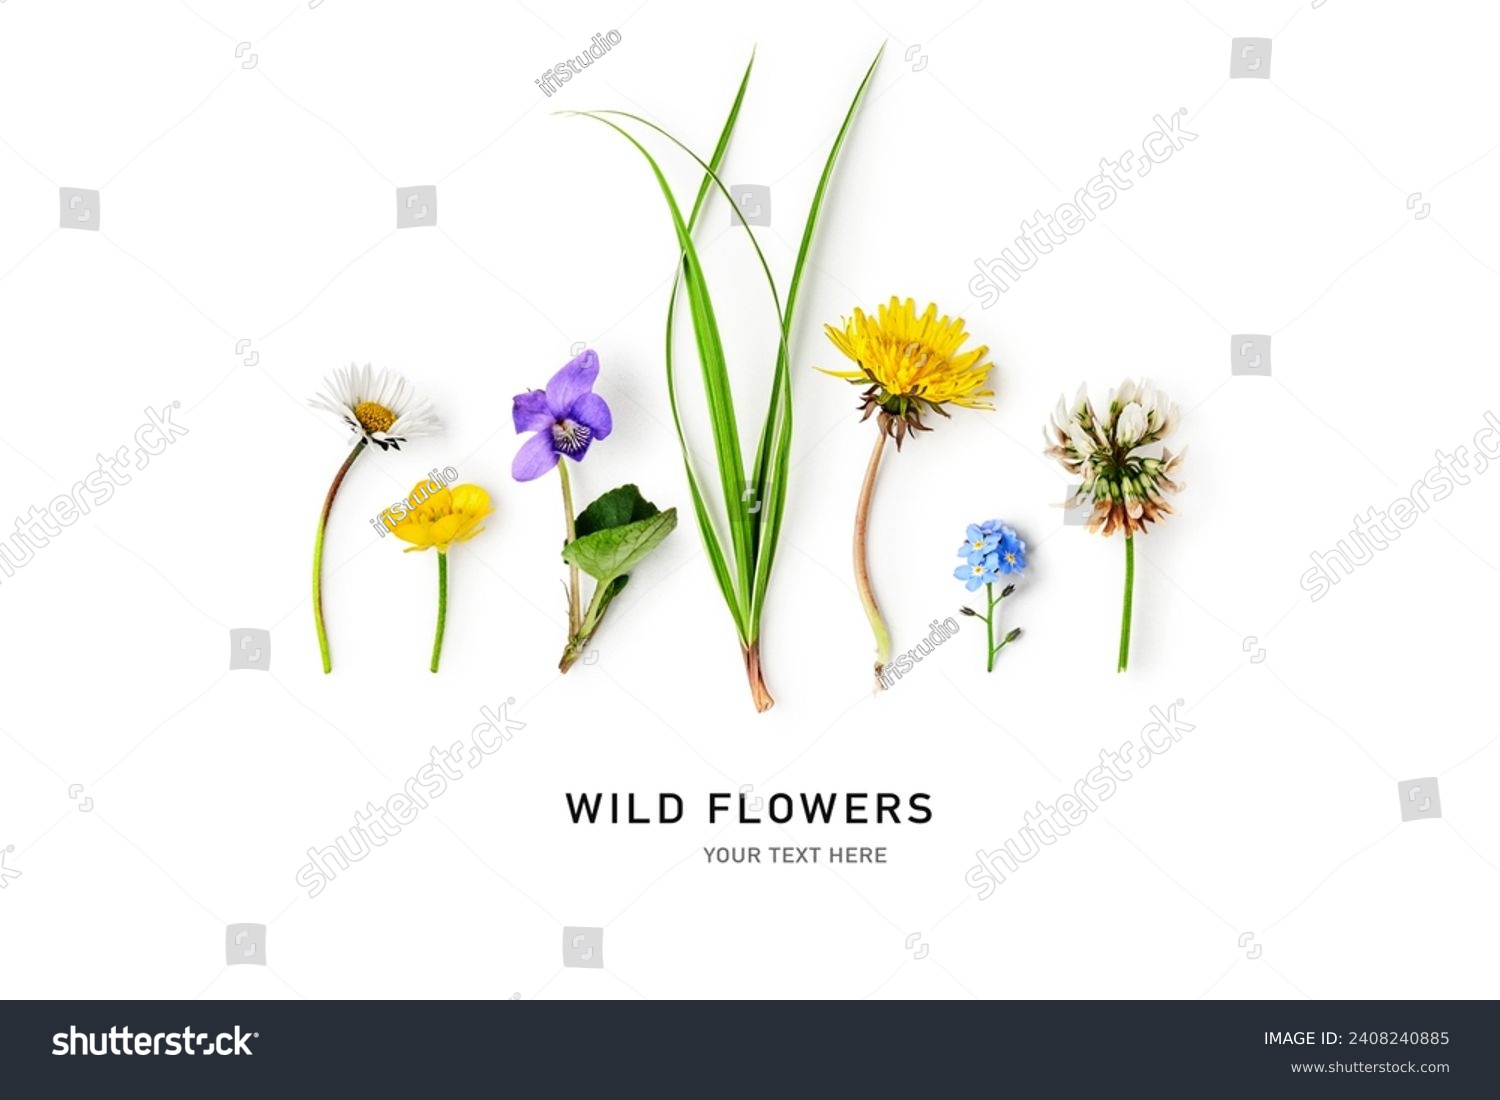 Meadow wild flower creative layout. Daisy, dandelion, violet viola, buttercup, clover flowers, grass isolated on white background. Design element. Springtime and summer nature. Flat lay, top view 
 #2408240885